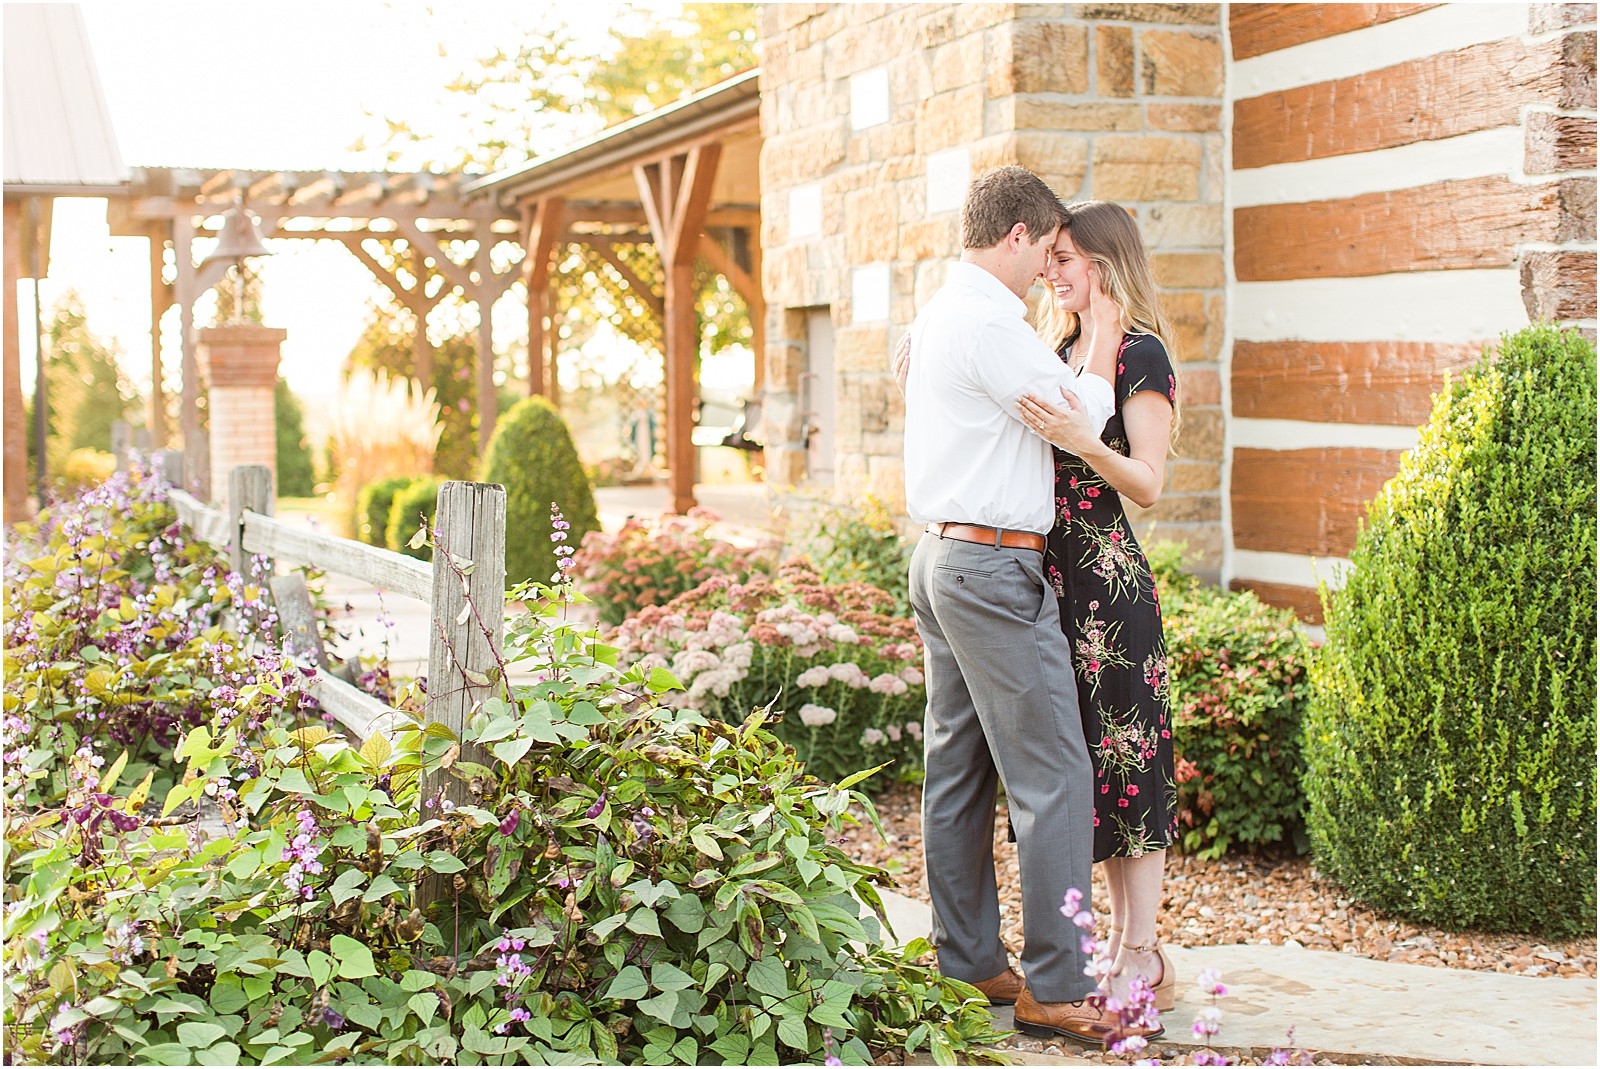 A Jasper Indiana Engagement Session | Tori and Kyle | Bret and Brandie Photography027.jpg